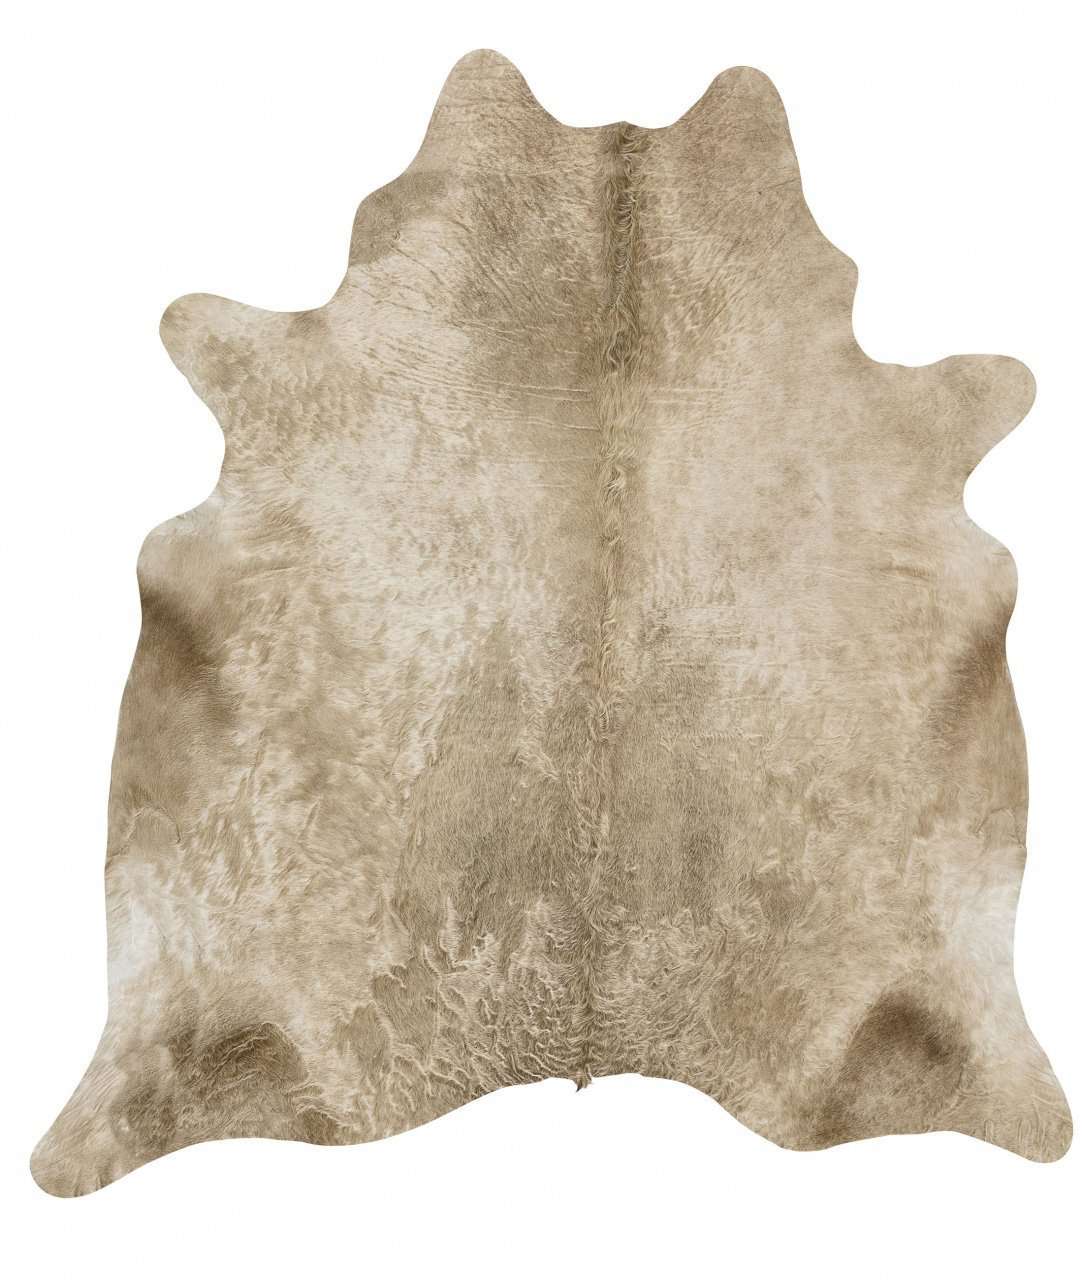 Rug Culture RUGS 170x120cm Cow Hide - Champagne